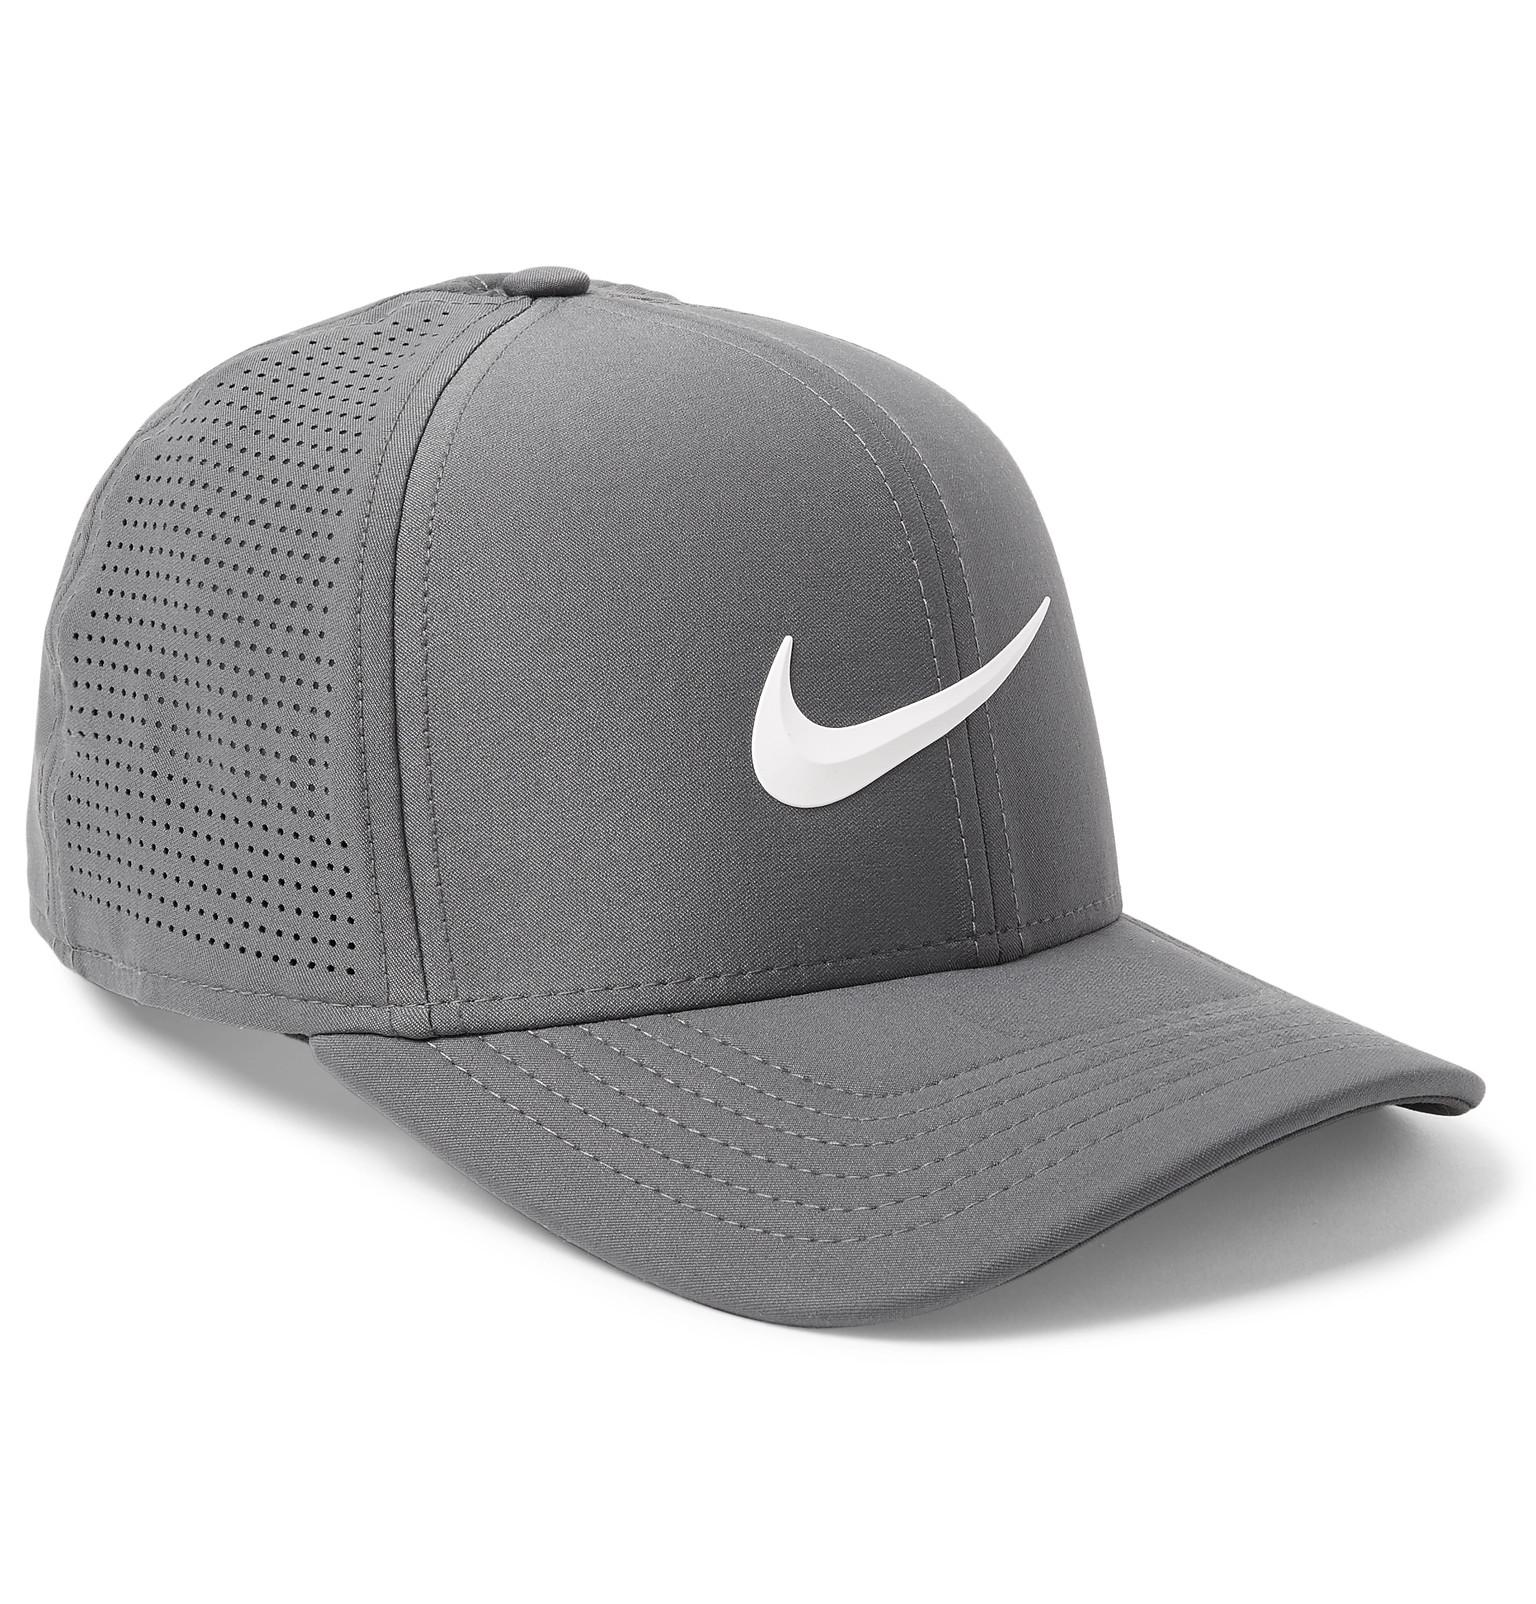 Nike Synthetic Aerobill Classic 99 Dri-fit Golf Cap in Charcoal (Grey) for  Men - Lyst